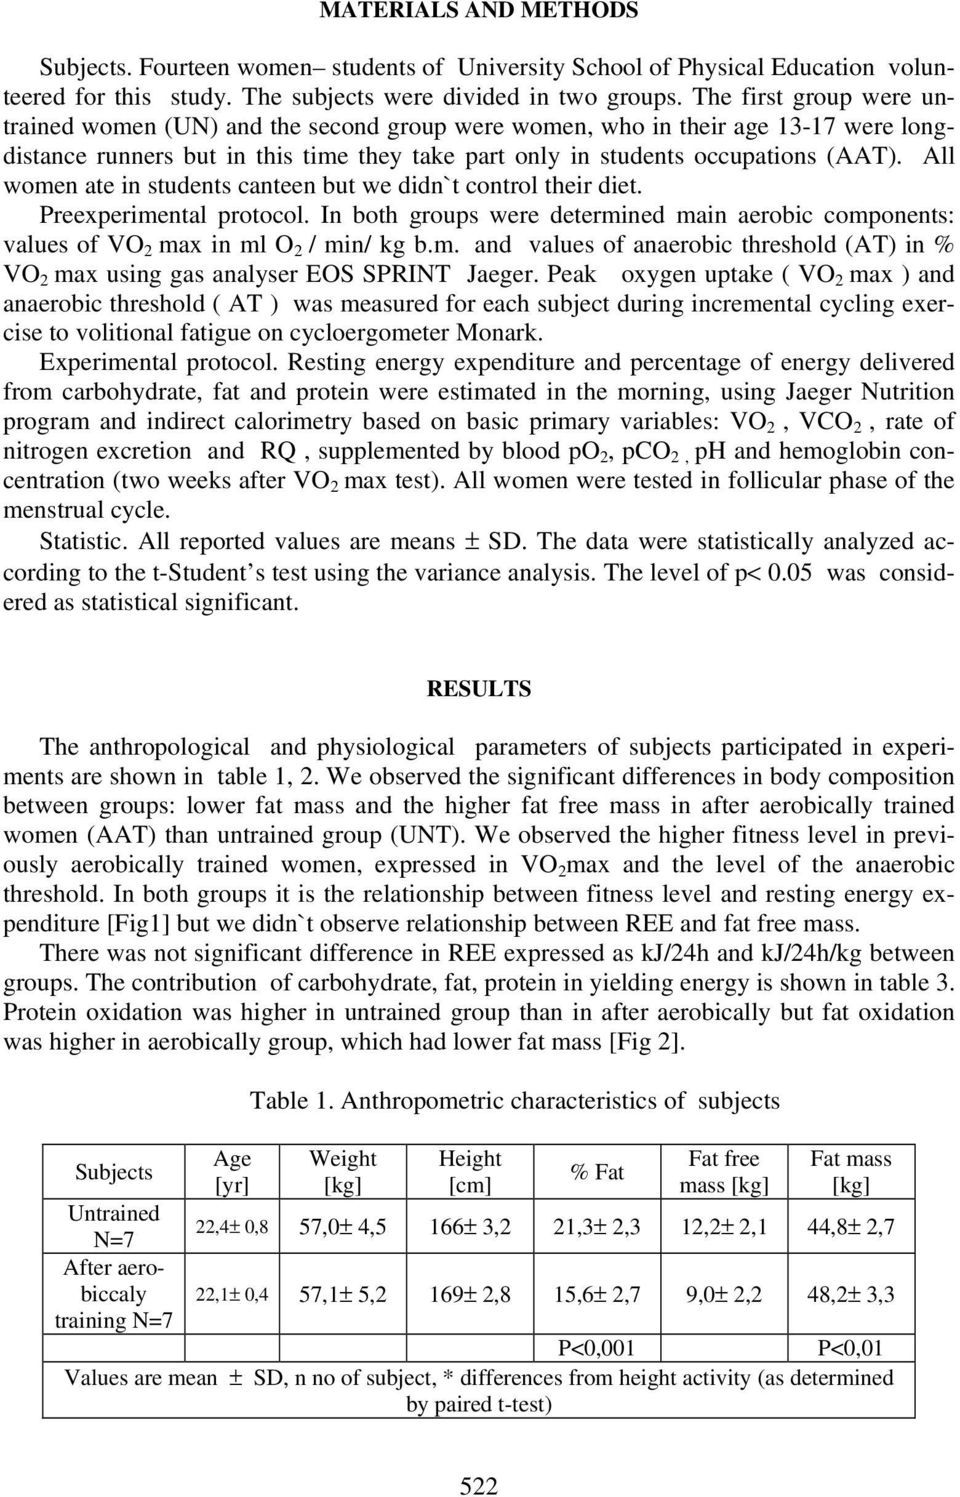 All women ate in students canteen but we didn`t control their diet. Preexperimental protocol. In both groups were determined main aerobic components: values of VO 2 max in ml O 2 / min/ kg b.m. and values of anaerobic threshold (AT) in % VO 2 max using gas analyser EOS SPRINT Jaeger.